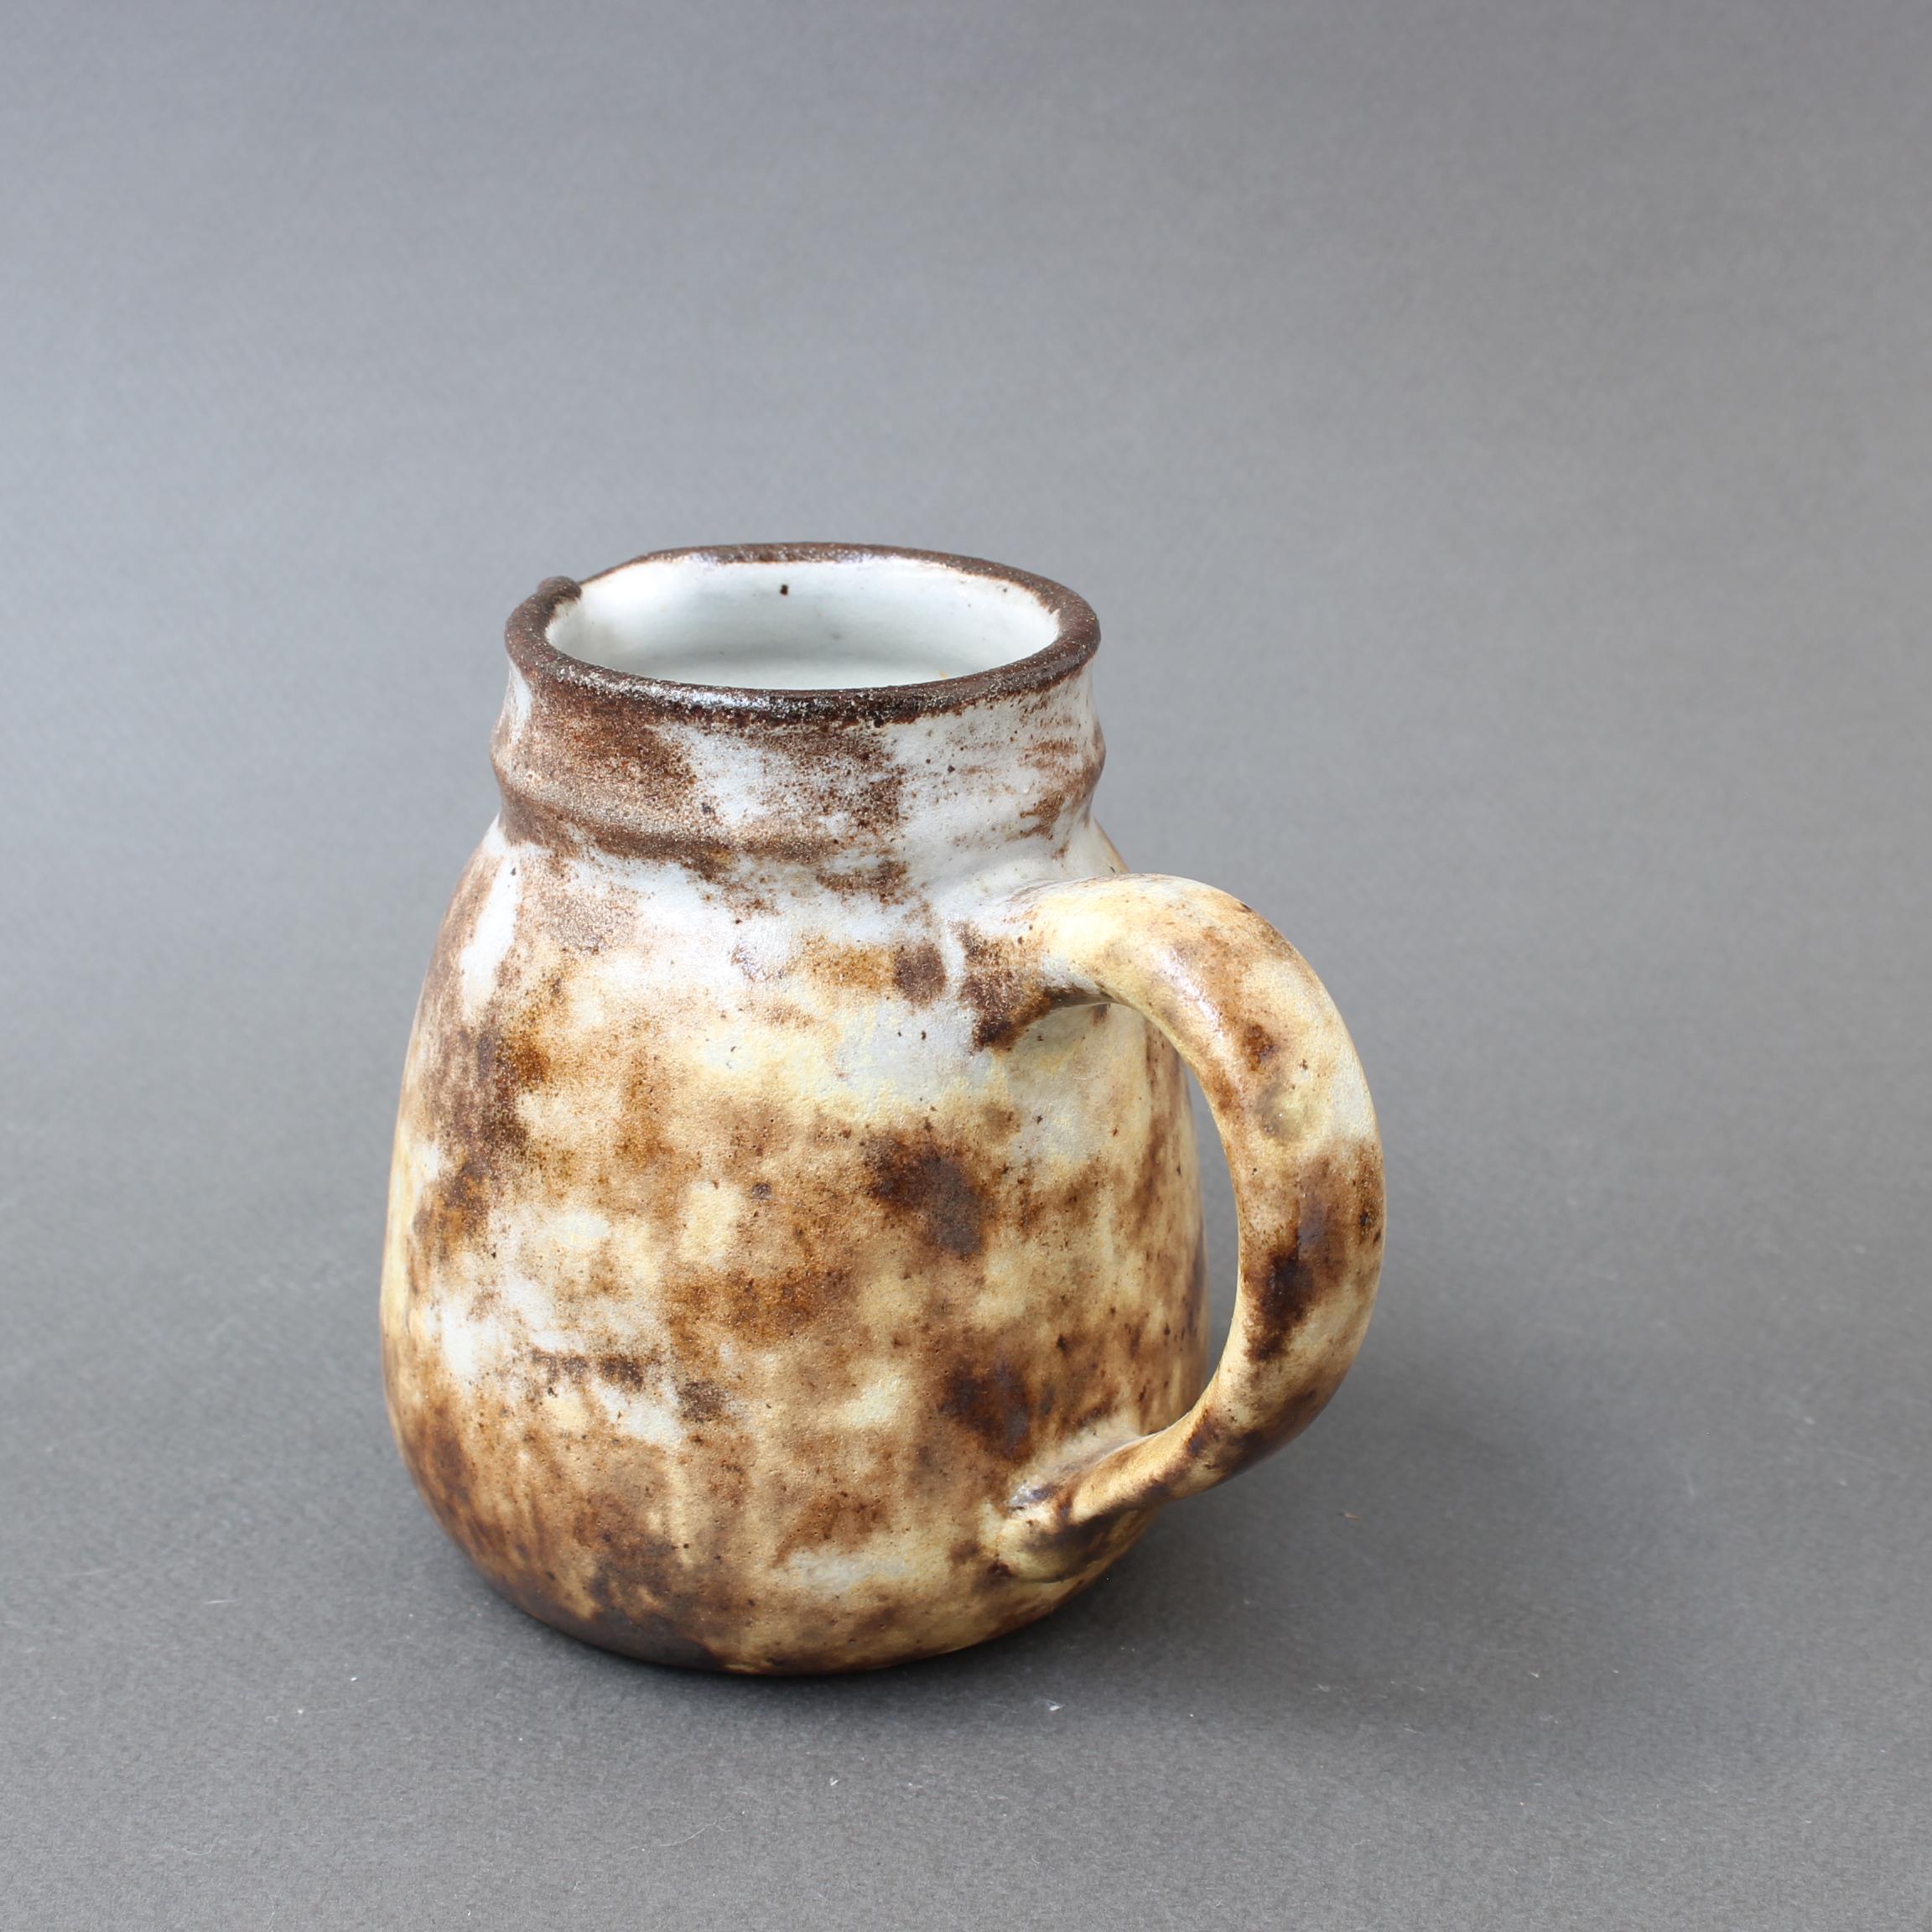 Midcentury, small, ceramic jug by Alexandre Kostanda (circa 1960s). In his trademark natural clay and rustic style, Kostanda created beautifully original vessels, such as vases, pitchers and pots which were both utilitarian and stunning works of